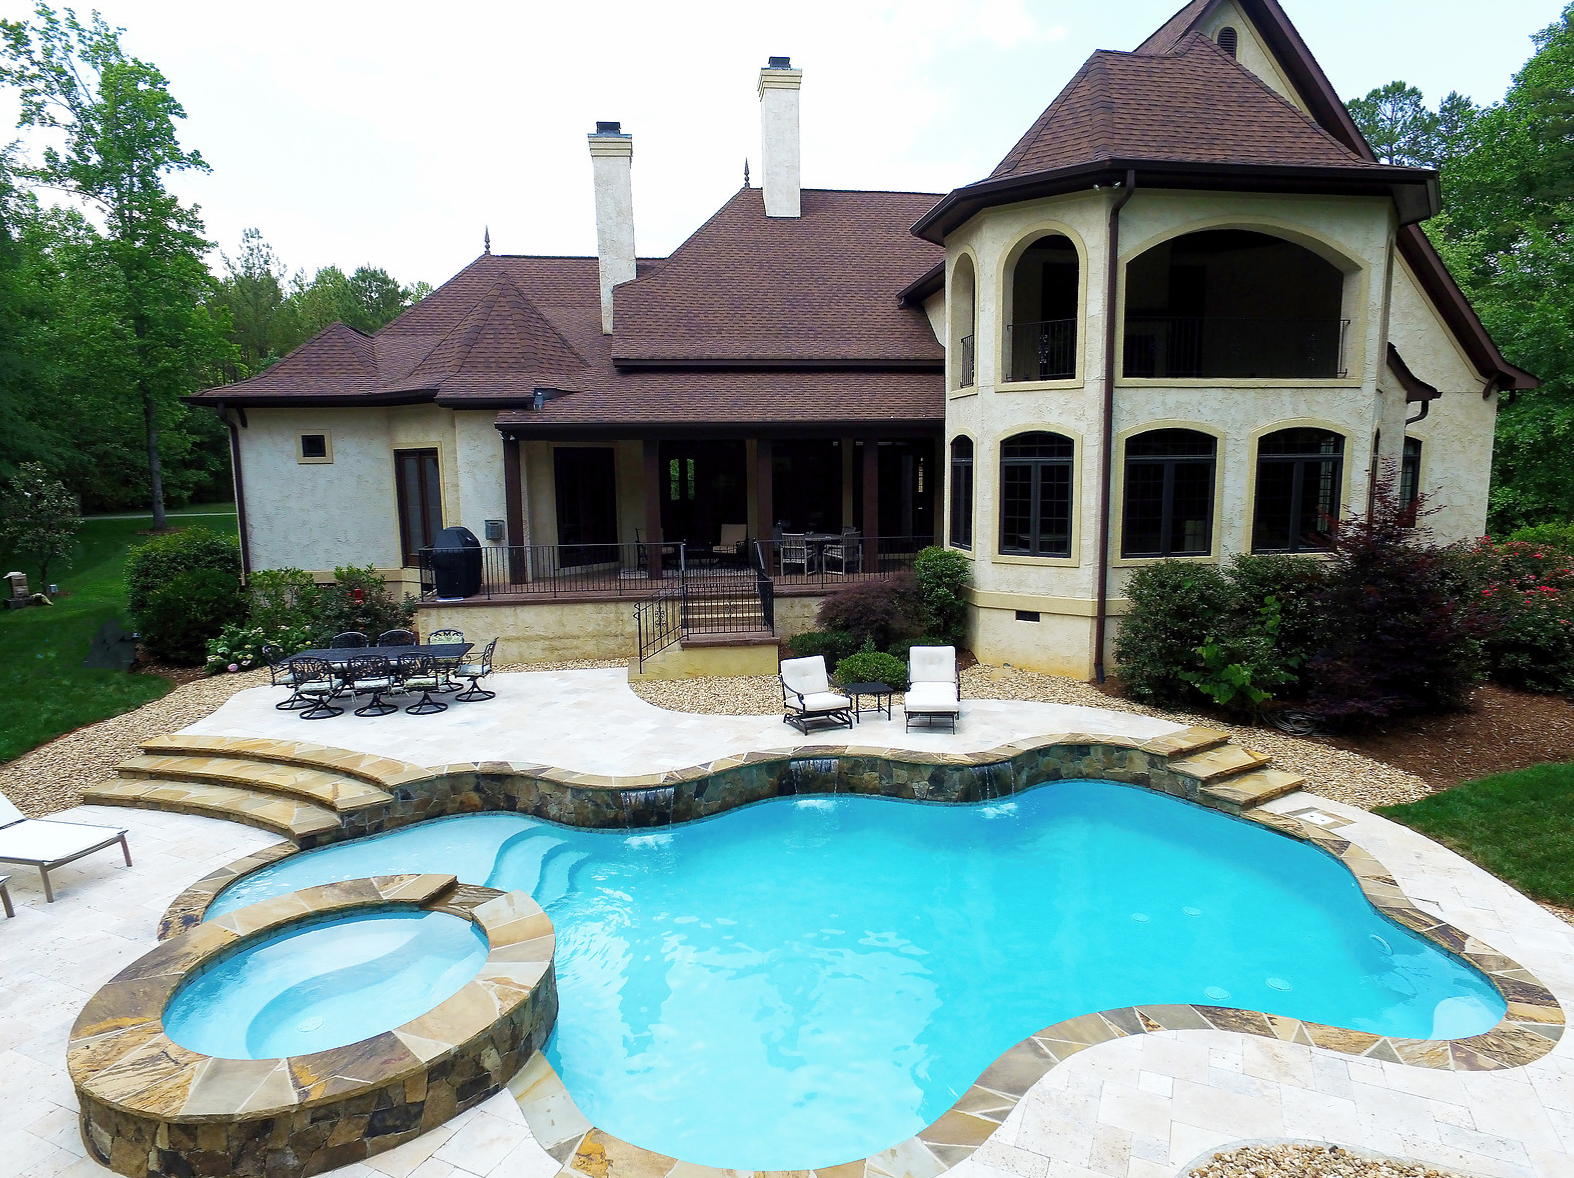 Design Your Inground Concrete Pool in Lake Norman North Carolina with CPC Pools 704-799-5236